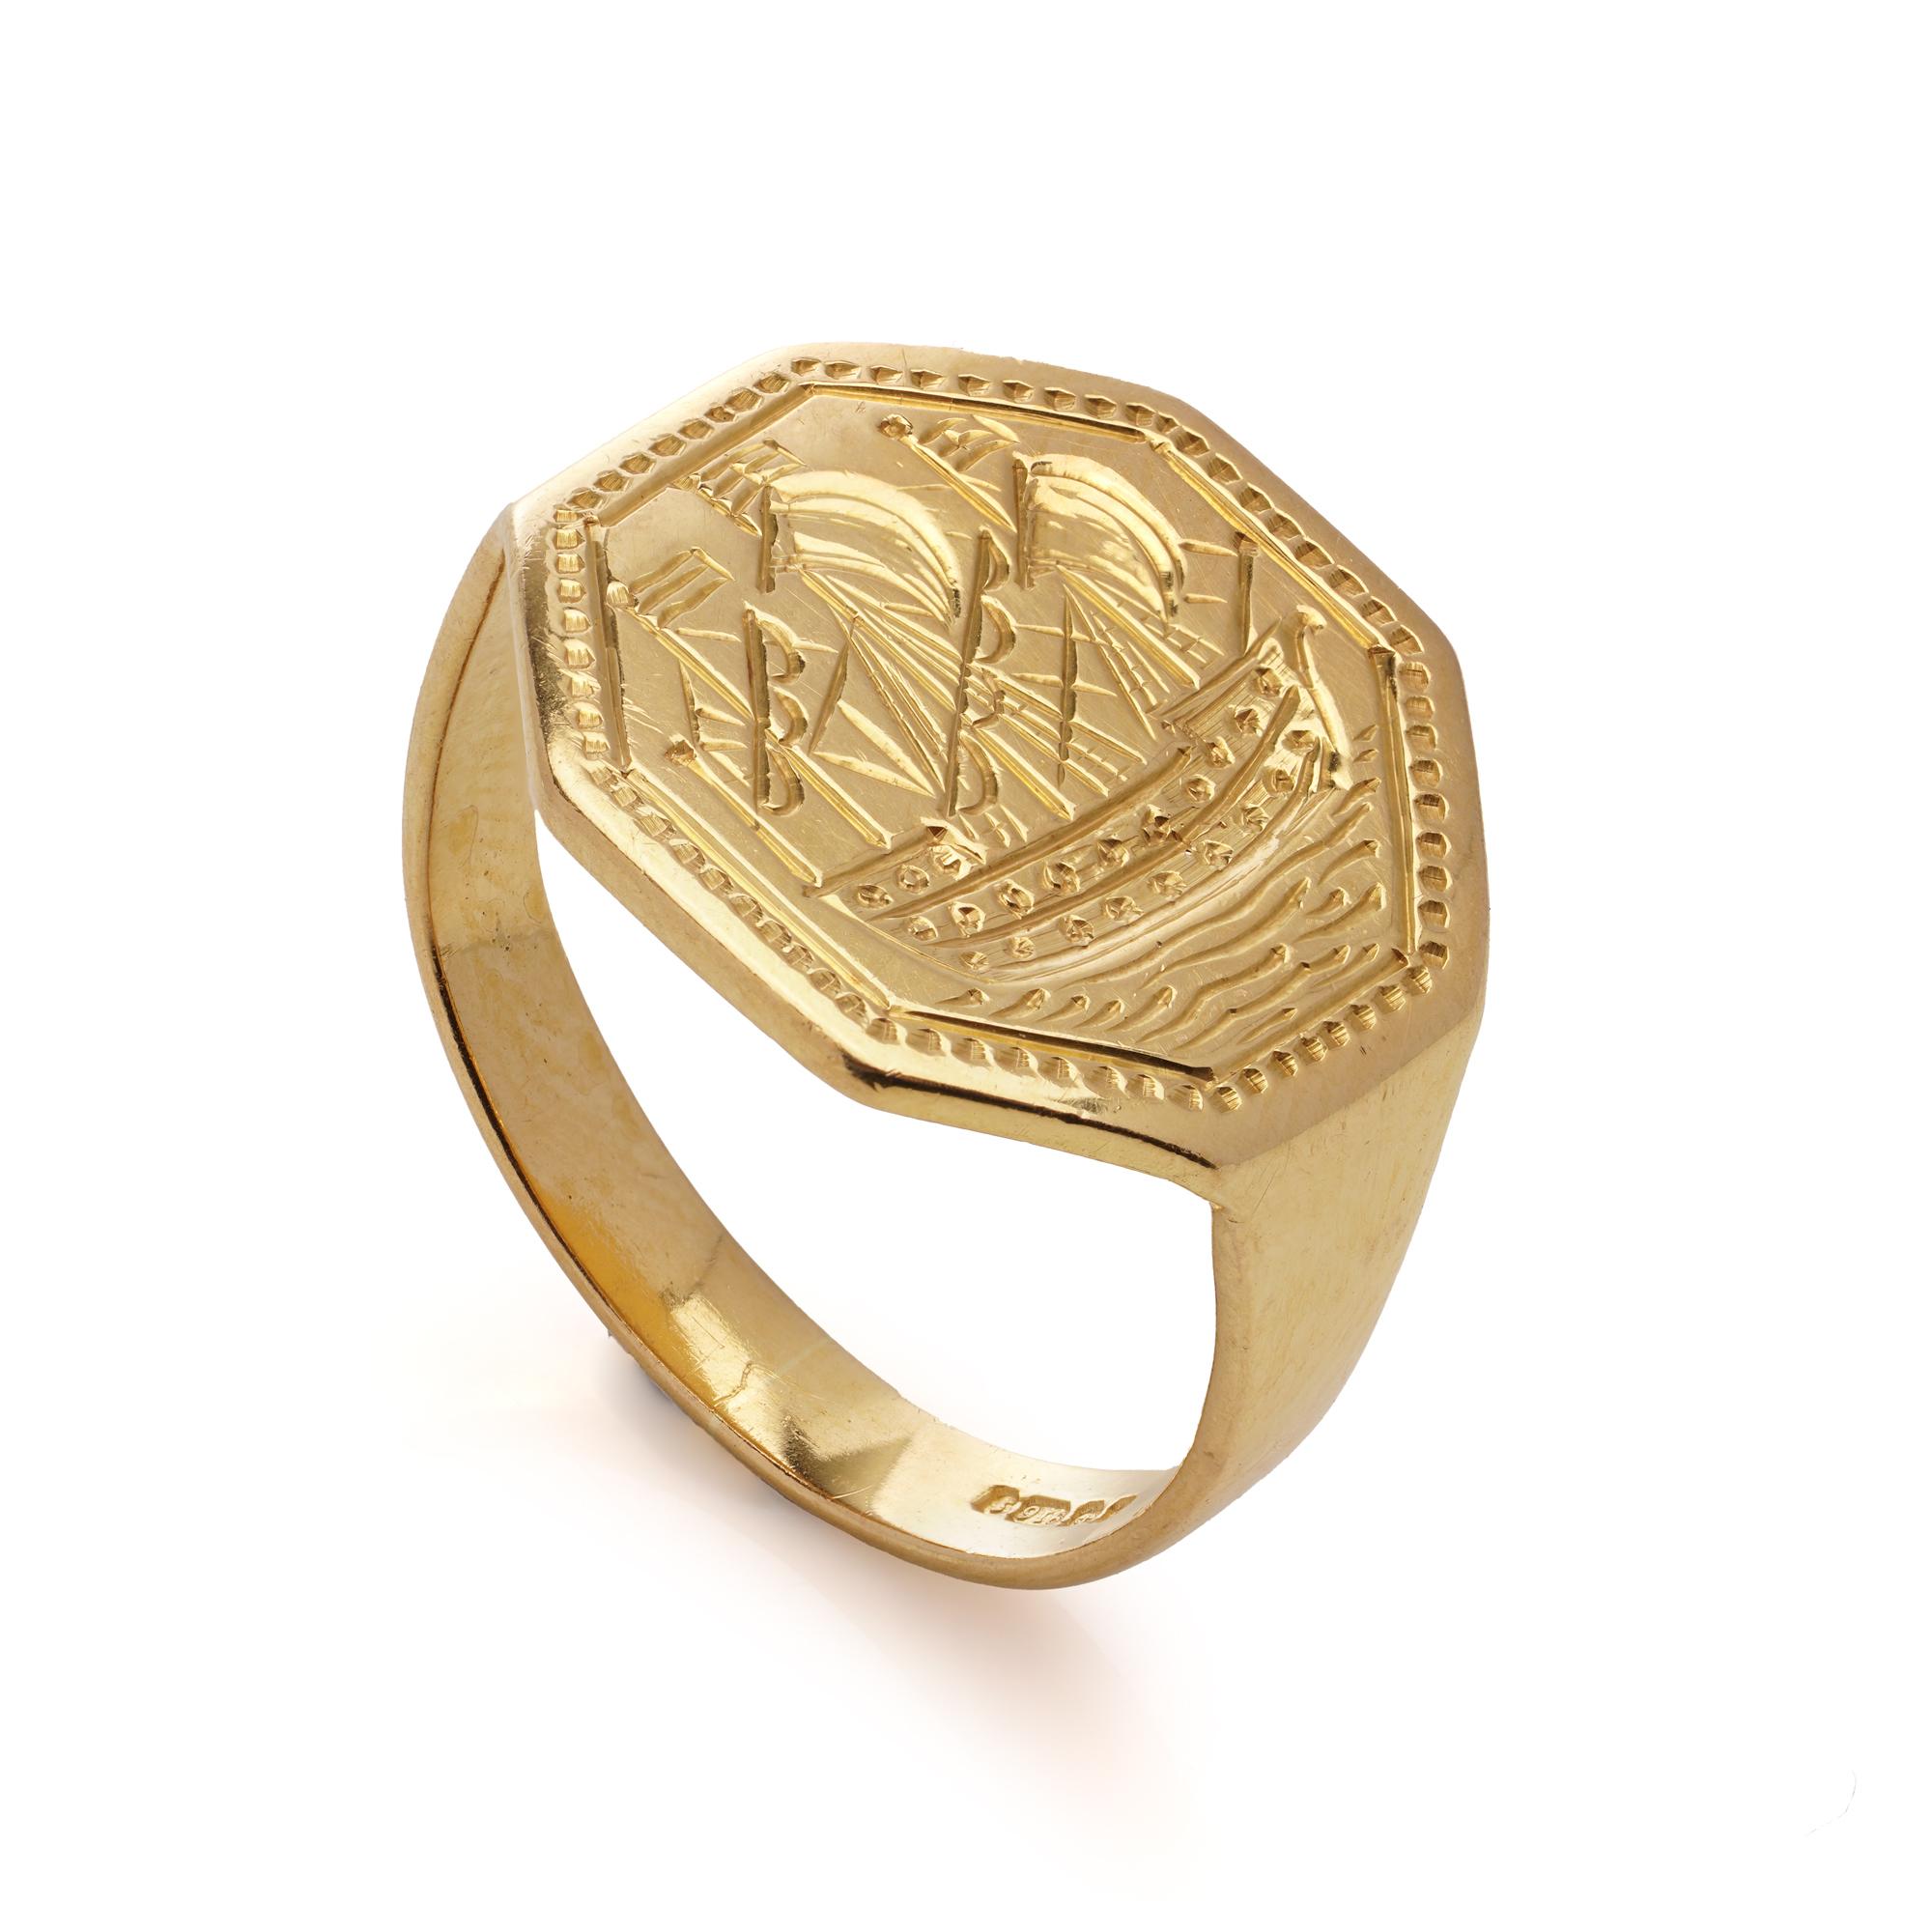 Vintage 22kt. yellow gold signet ring featuring the man-of-war ship For Sale 2